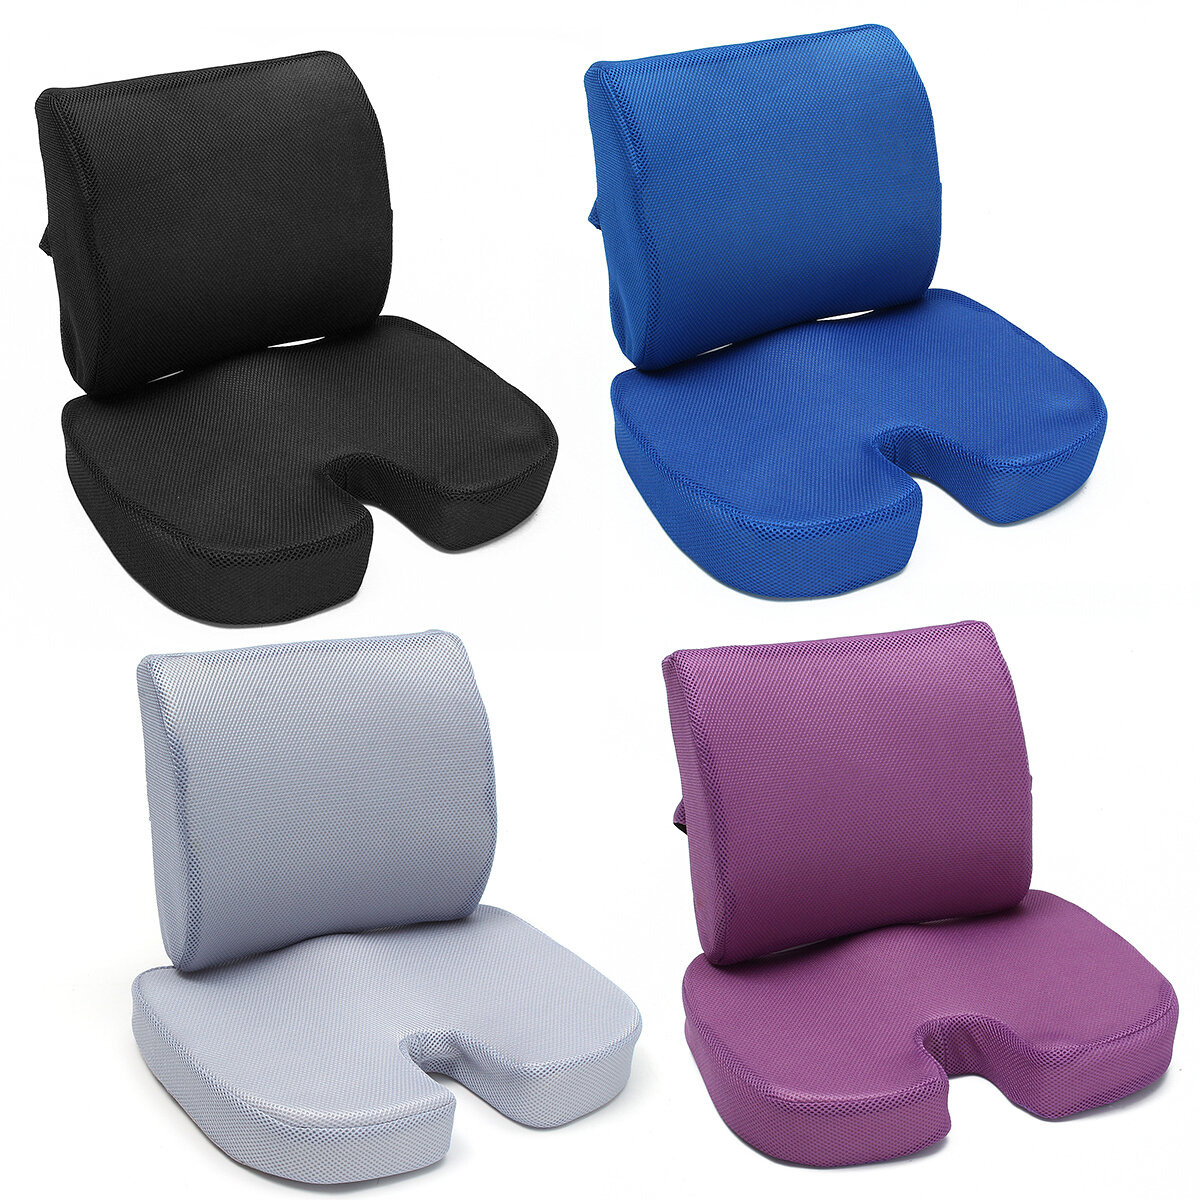 Image of Memory Foam Seat Cushion Orthopedic Coccyx Protection Car Chair Backrest Waist Pad Pain Relief Massage Hip Cushio